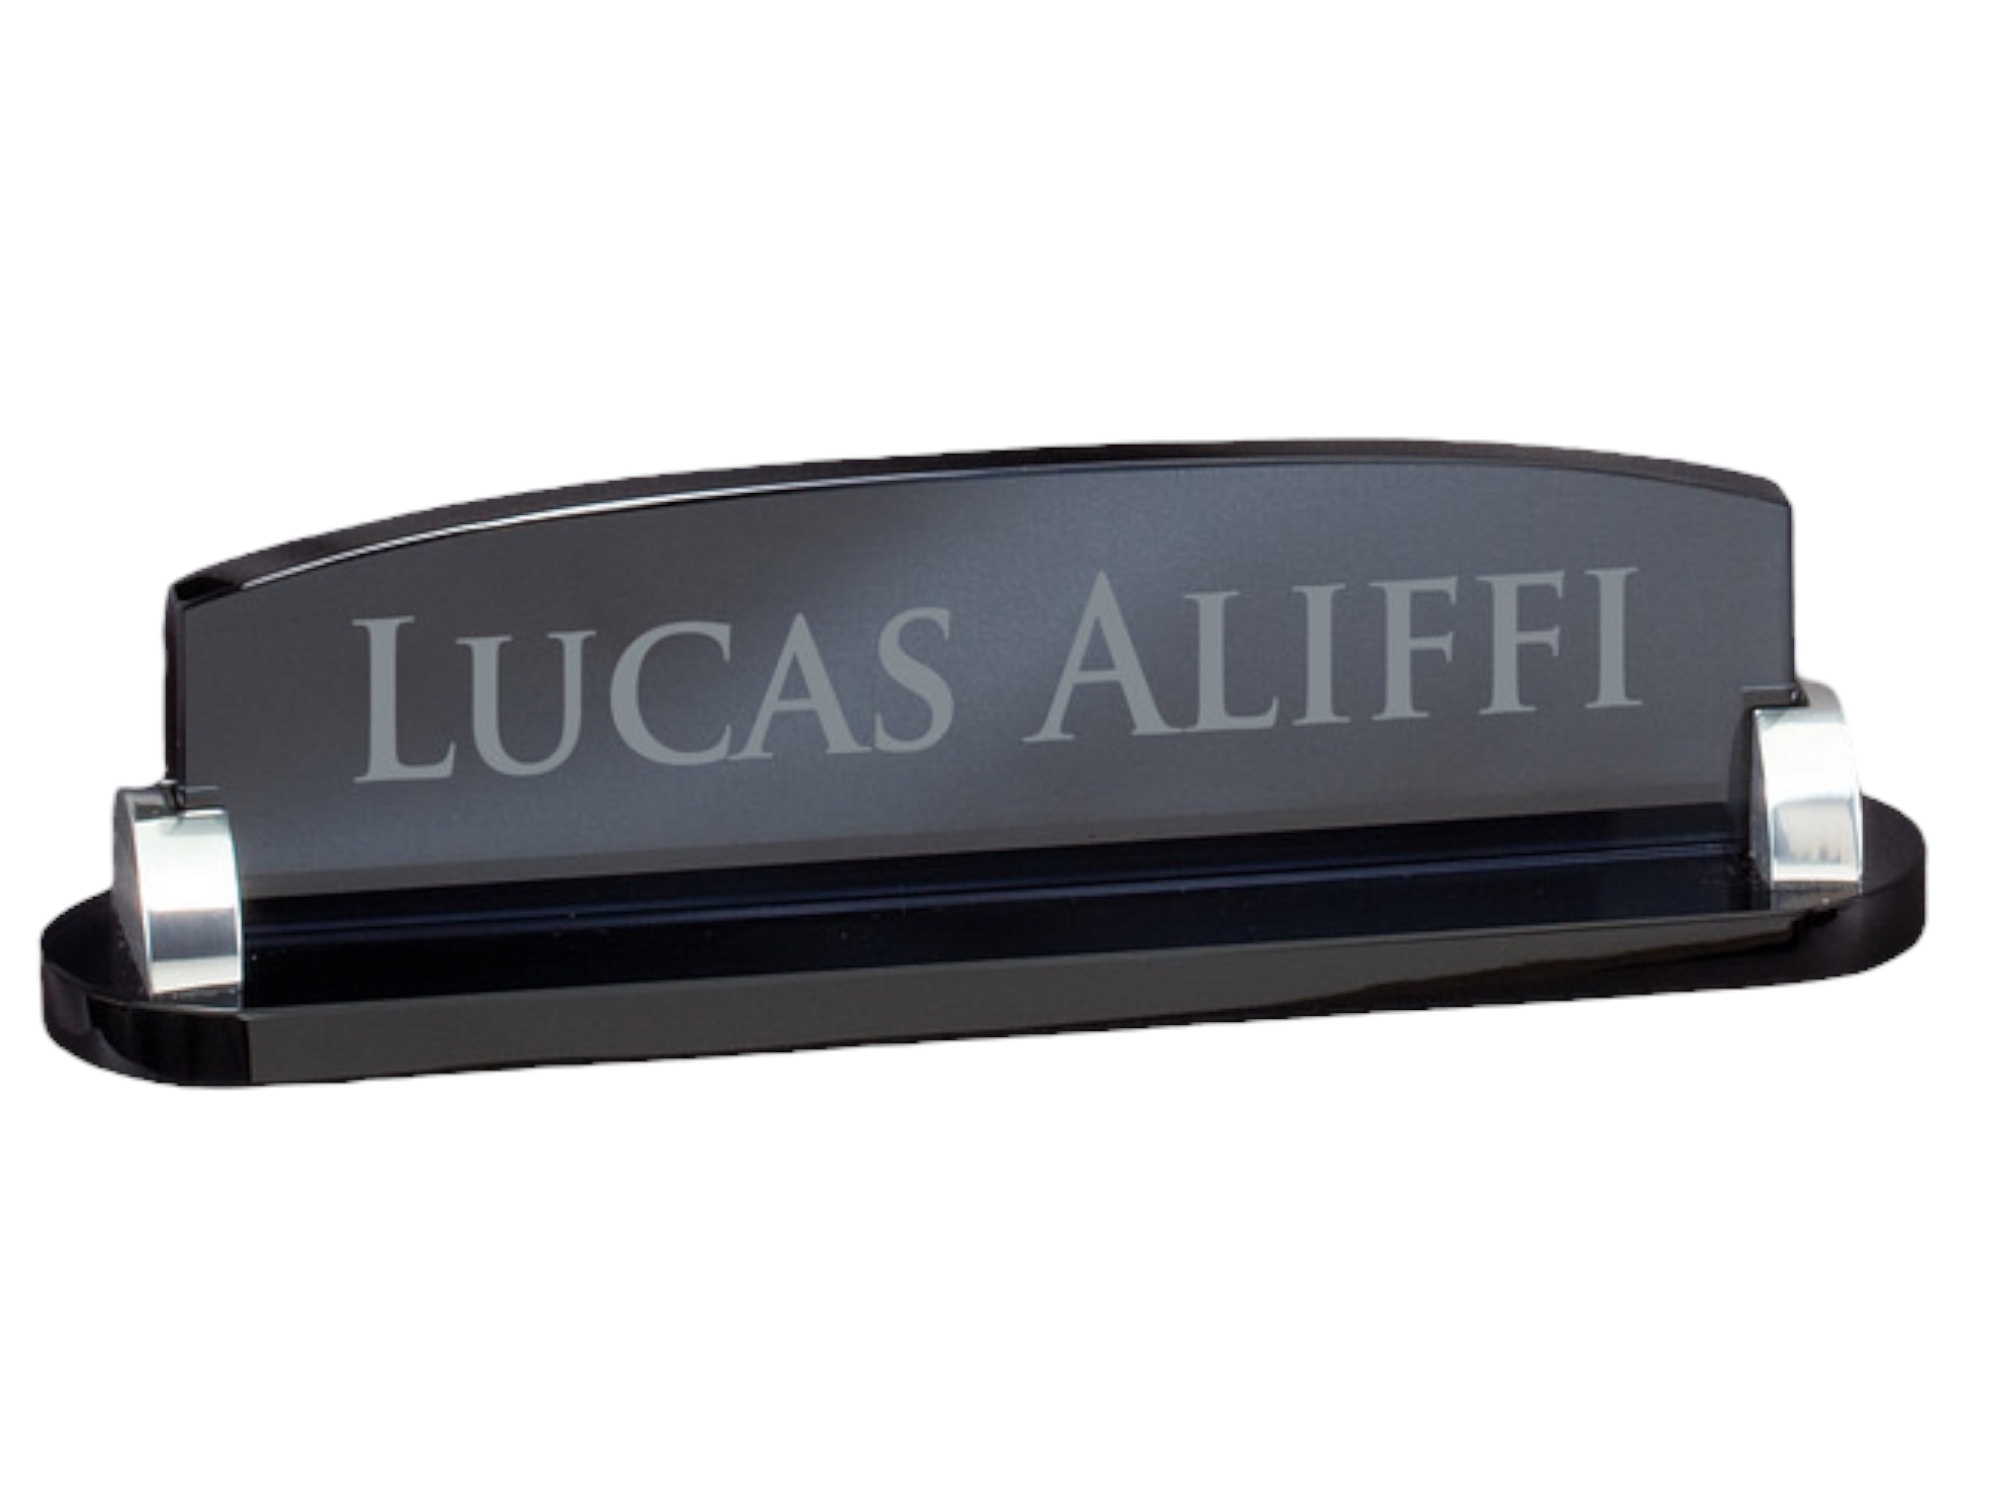 Our smoked glass desk name plate on a completely white background. The name plate is 2.5" x 9.5" in size, weighs 1.6 lbs and is laser engraved with the name of Lucas Aliffi.